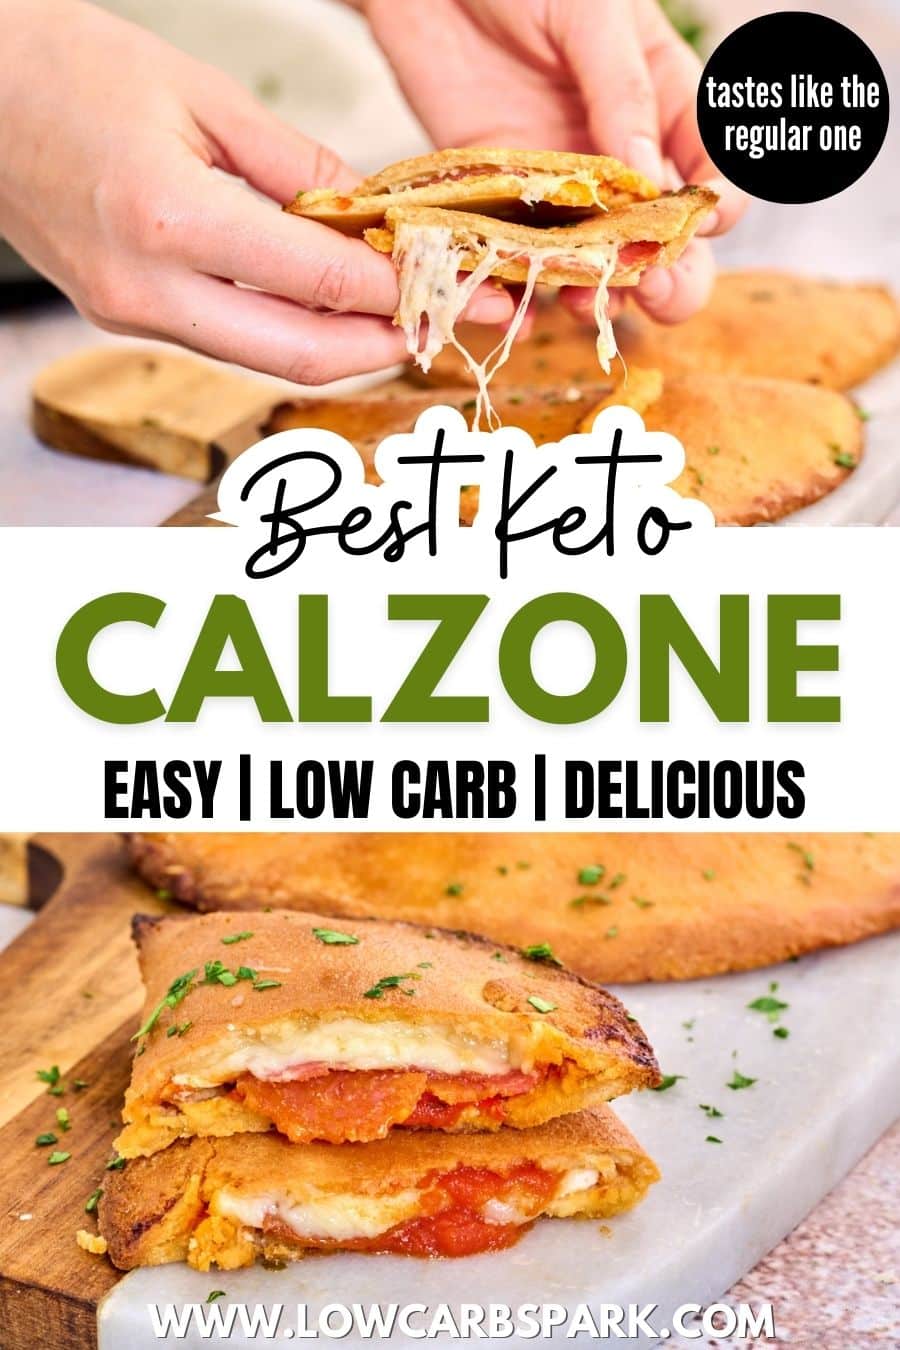 Easy Keto Calzone for Pizza Lovers